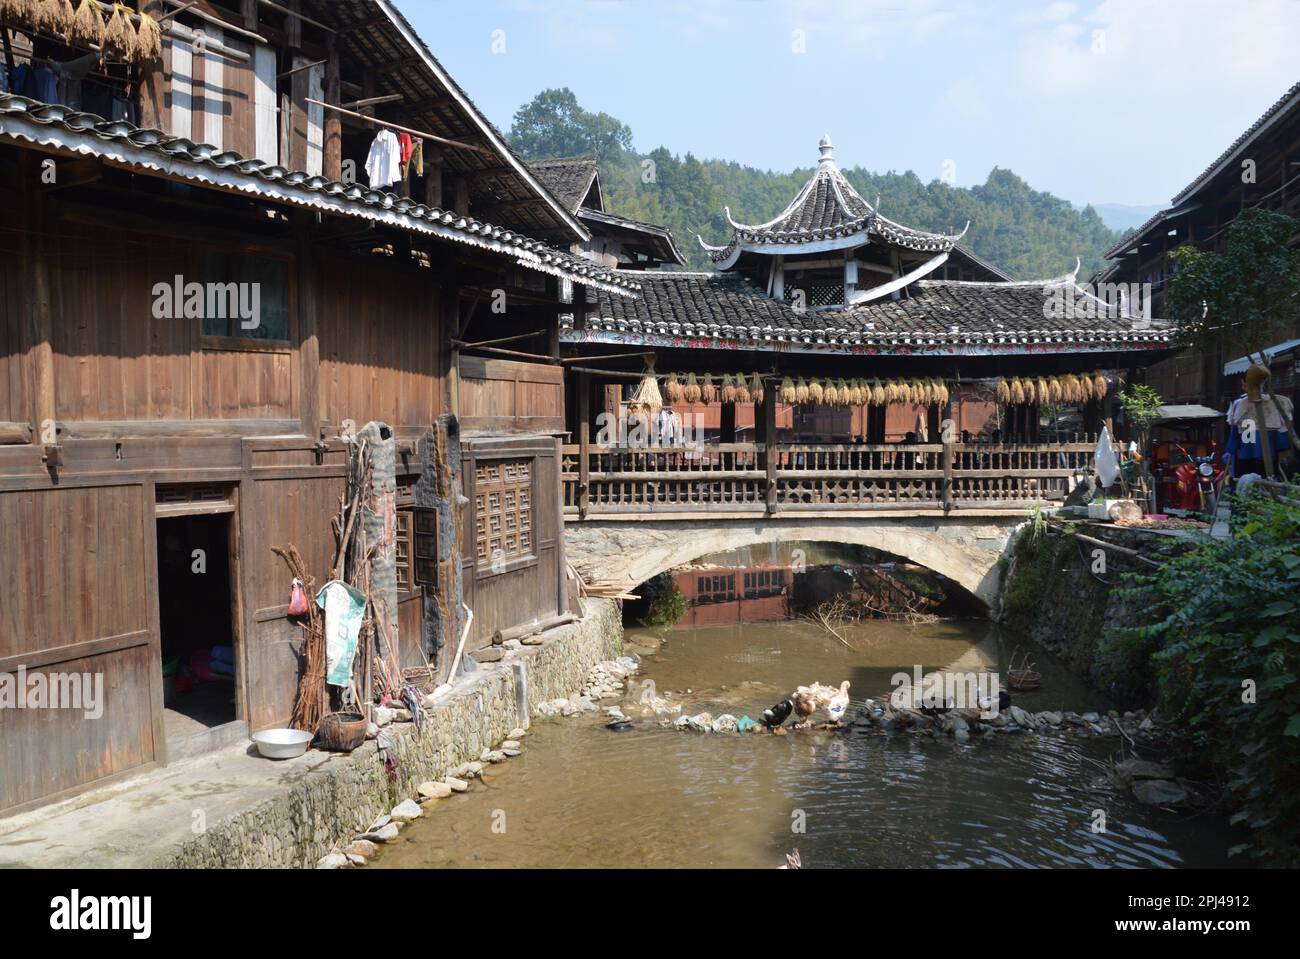 People's Republic of China, Guizhou Province,  Zhaoxing Dong Village:  view of the old wooden buildings from a bridge over the stream. Stock Photo